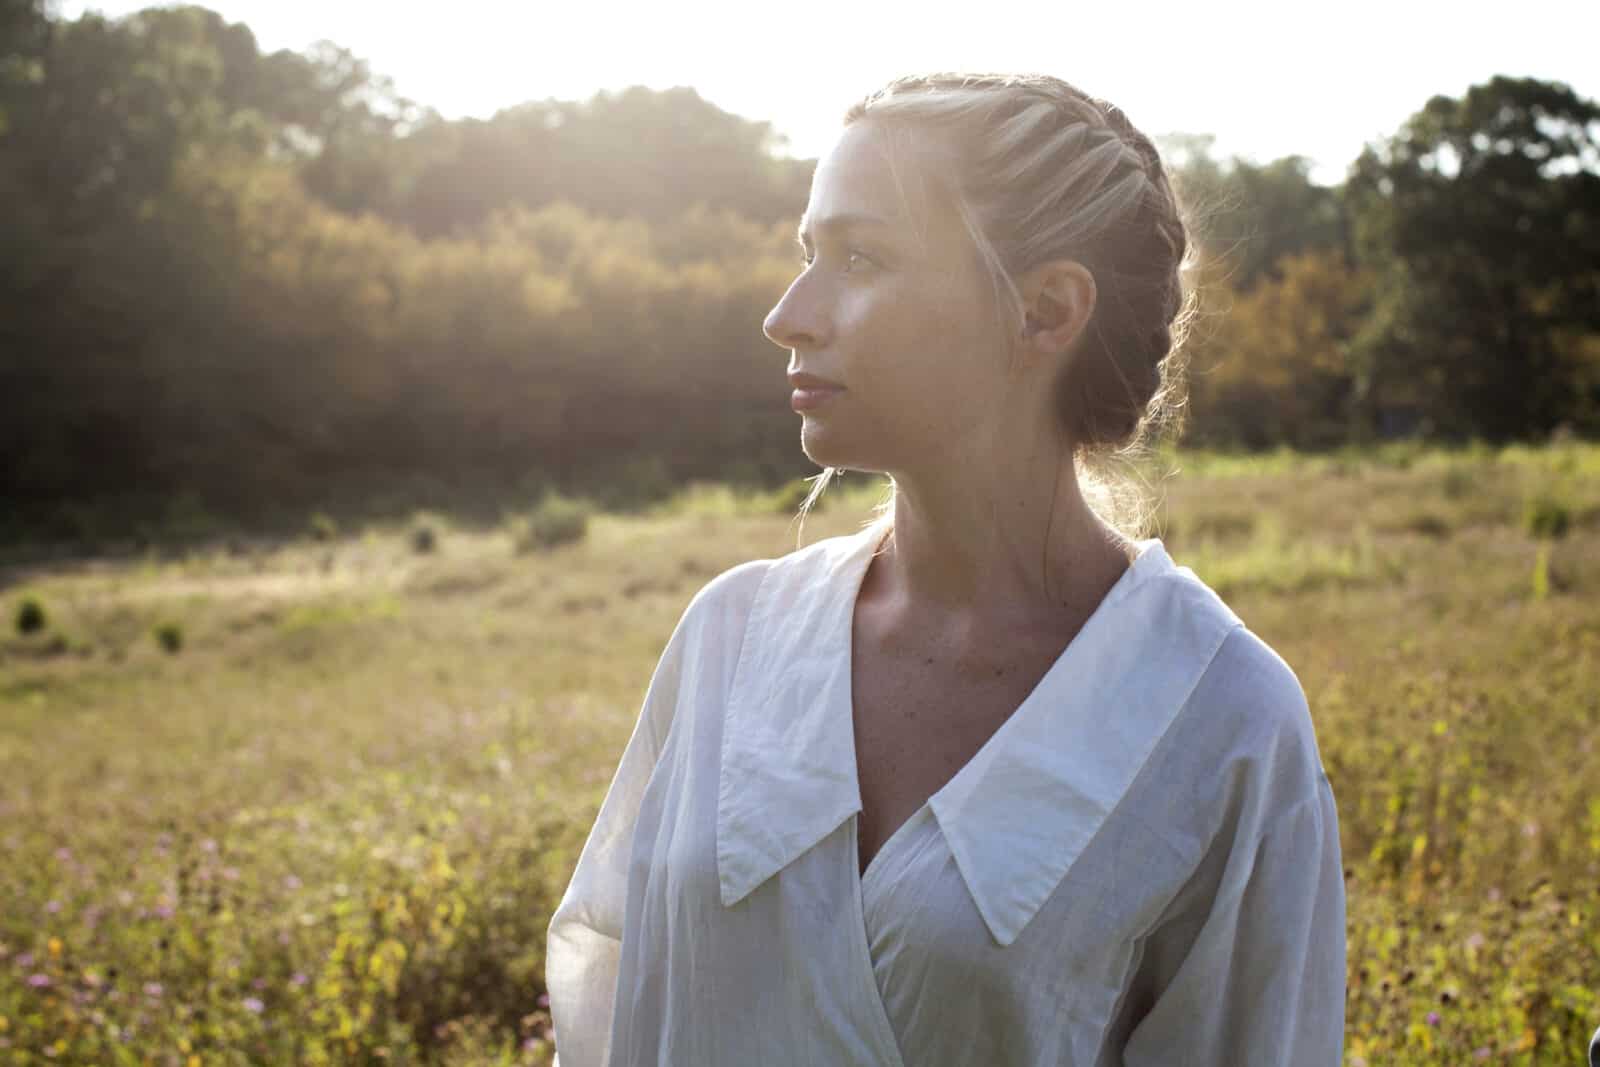 Internationally recognized composer Sarah Kirkland Snider stands in profile in a field in the sun. Press photo courtesy of the artist.